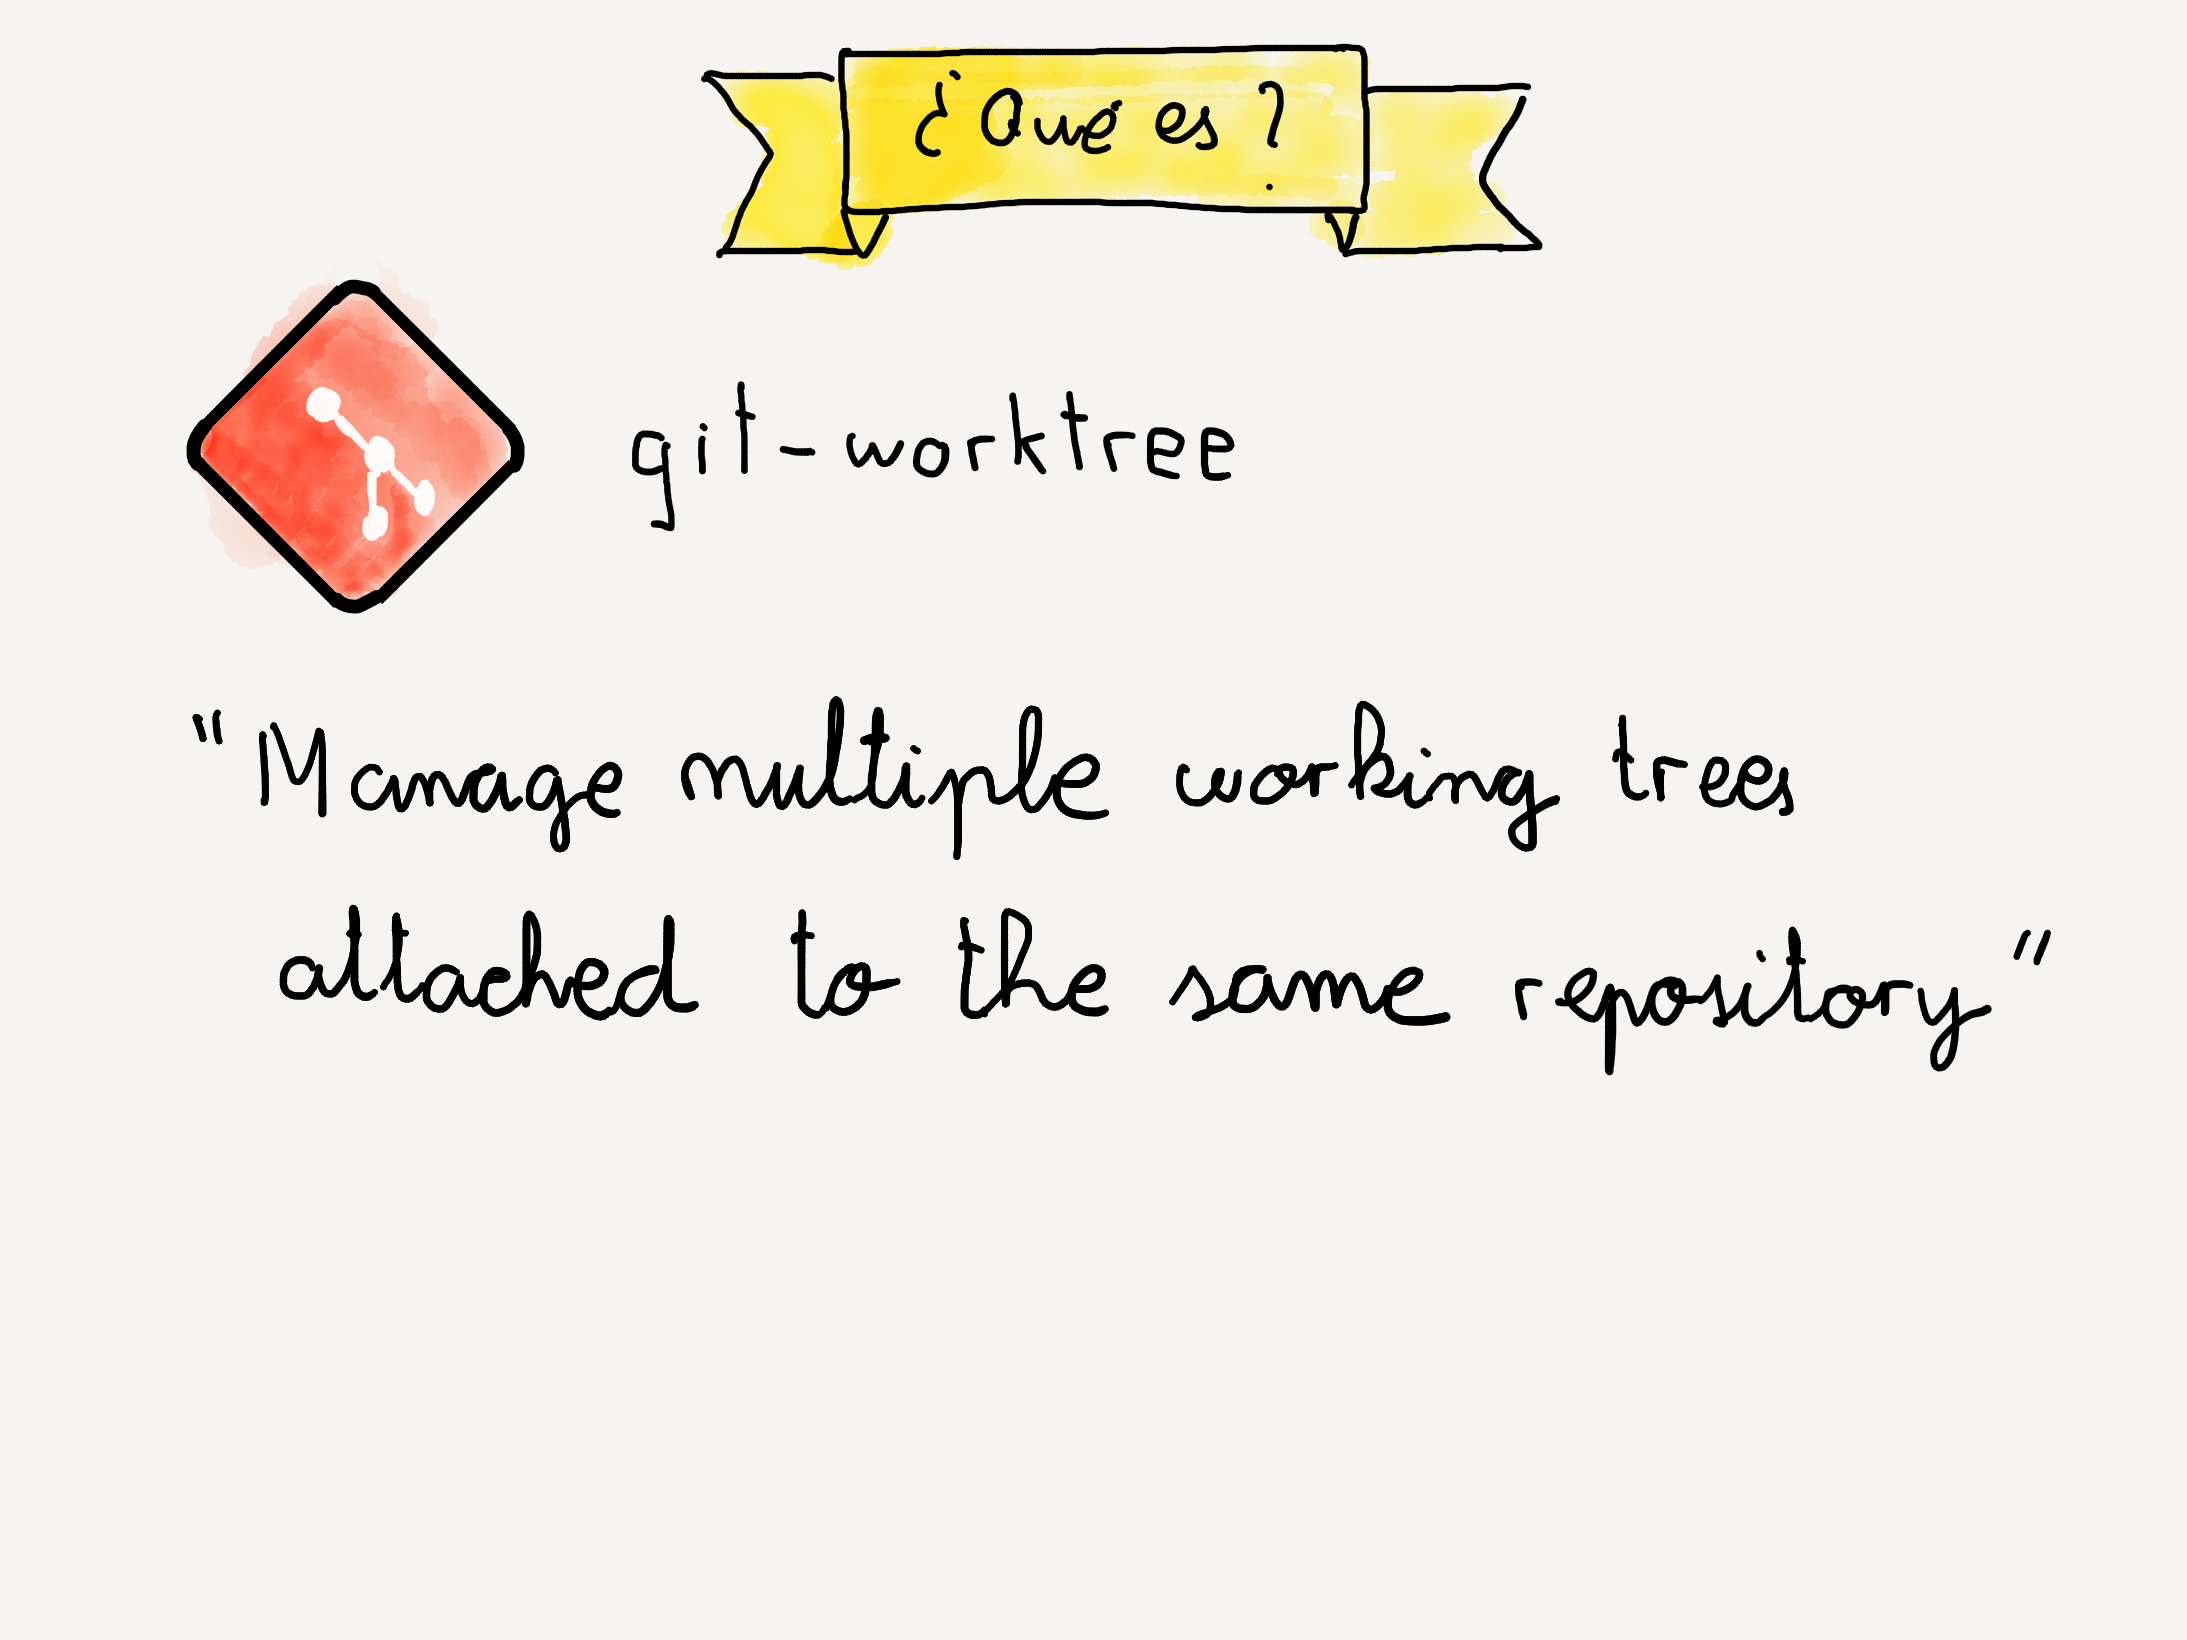 images/Paper.Talk_Git_worktrees.4.PNG